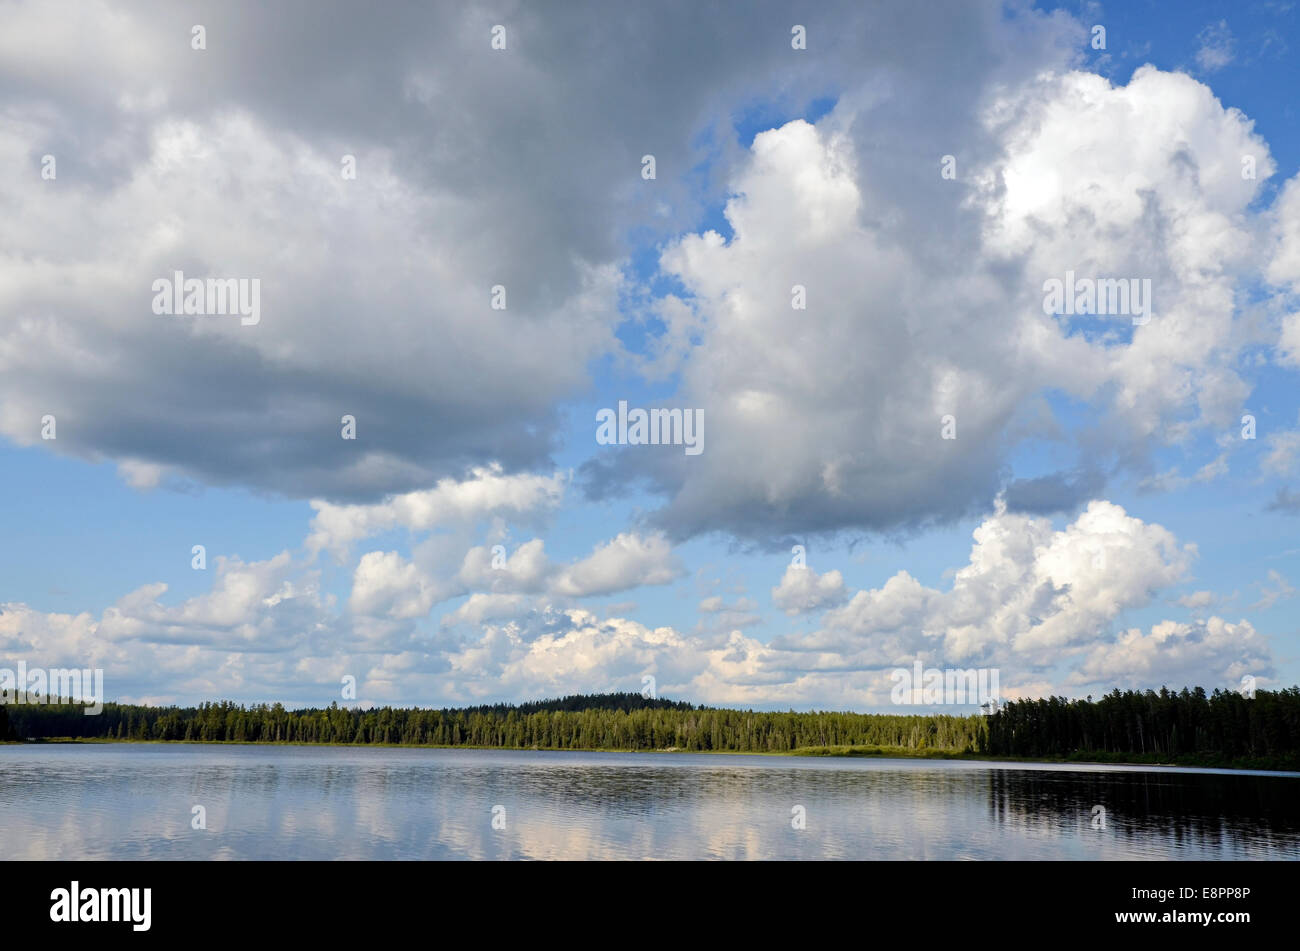 Lake in Sleeping Giant Provincial Park under clouds sky Stock Photo